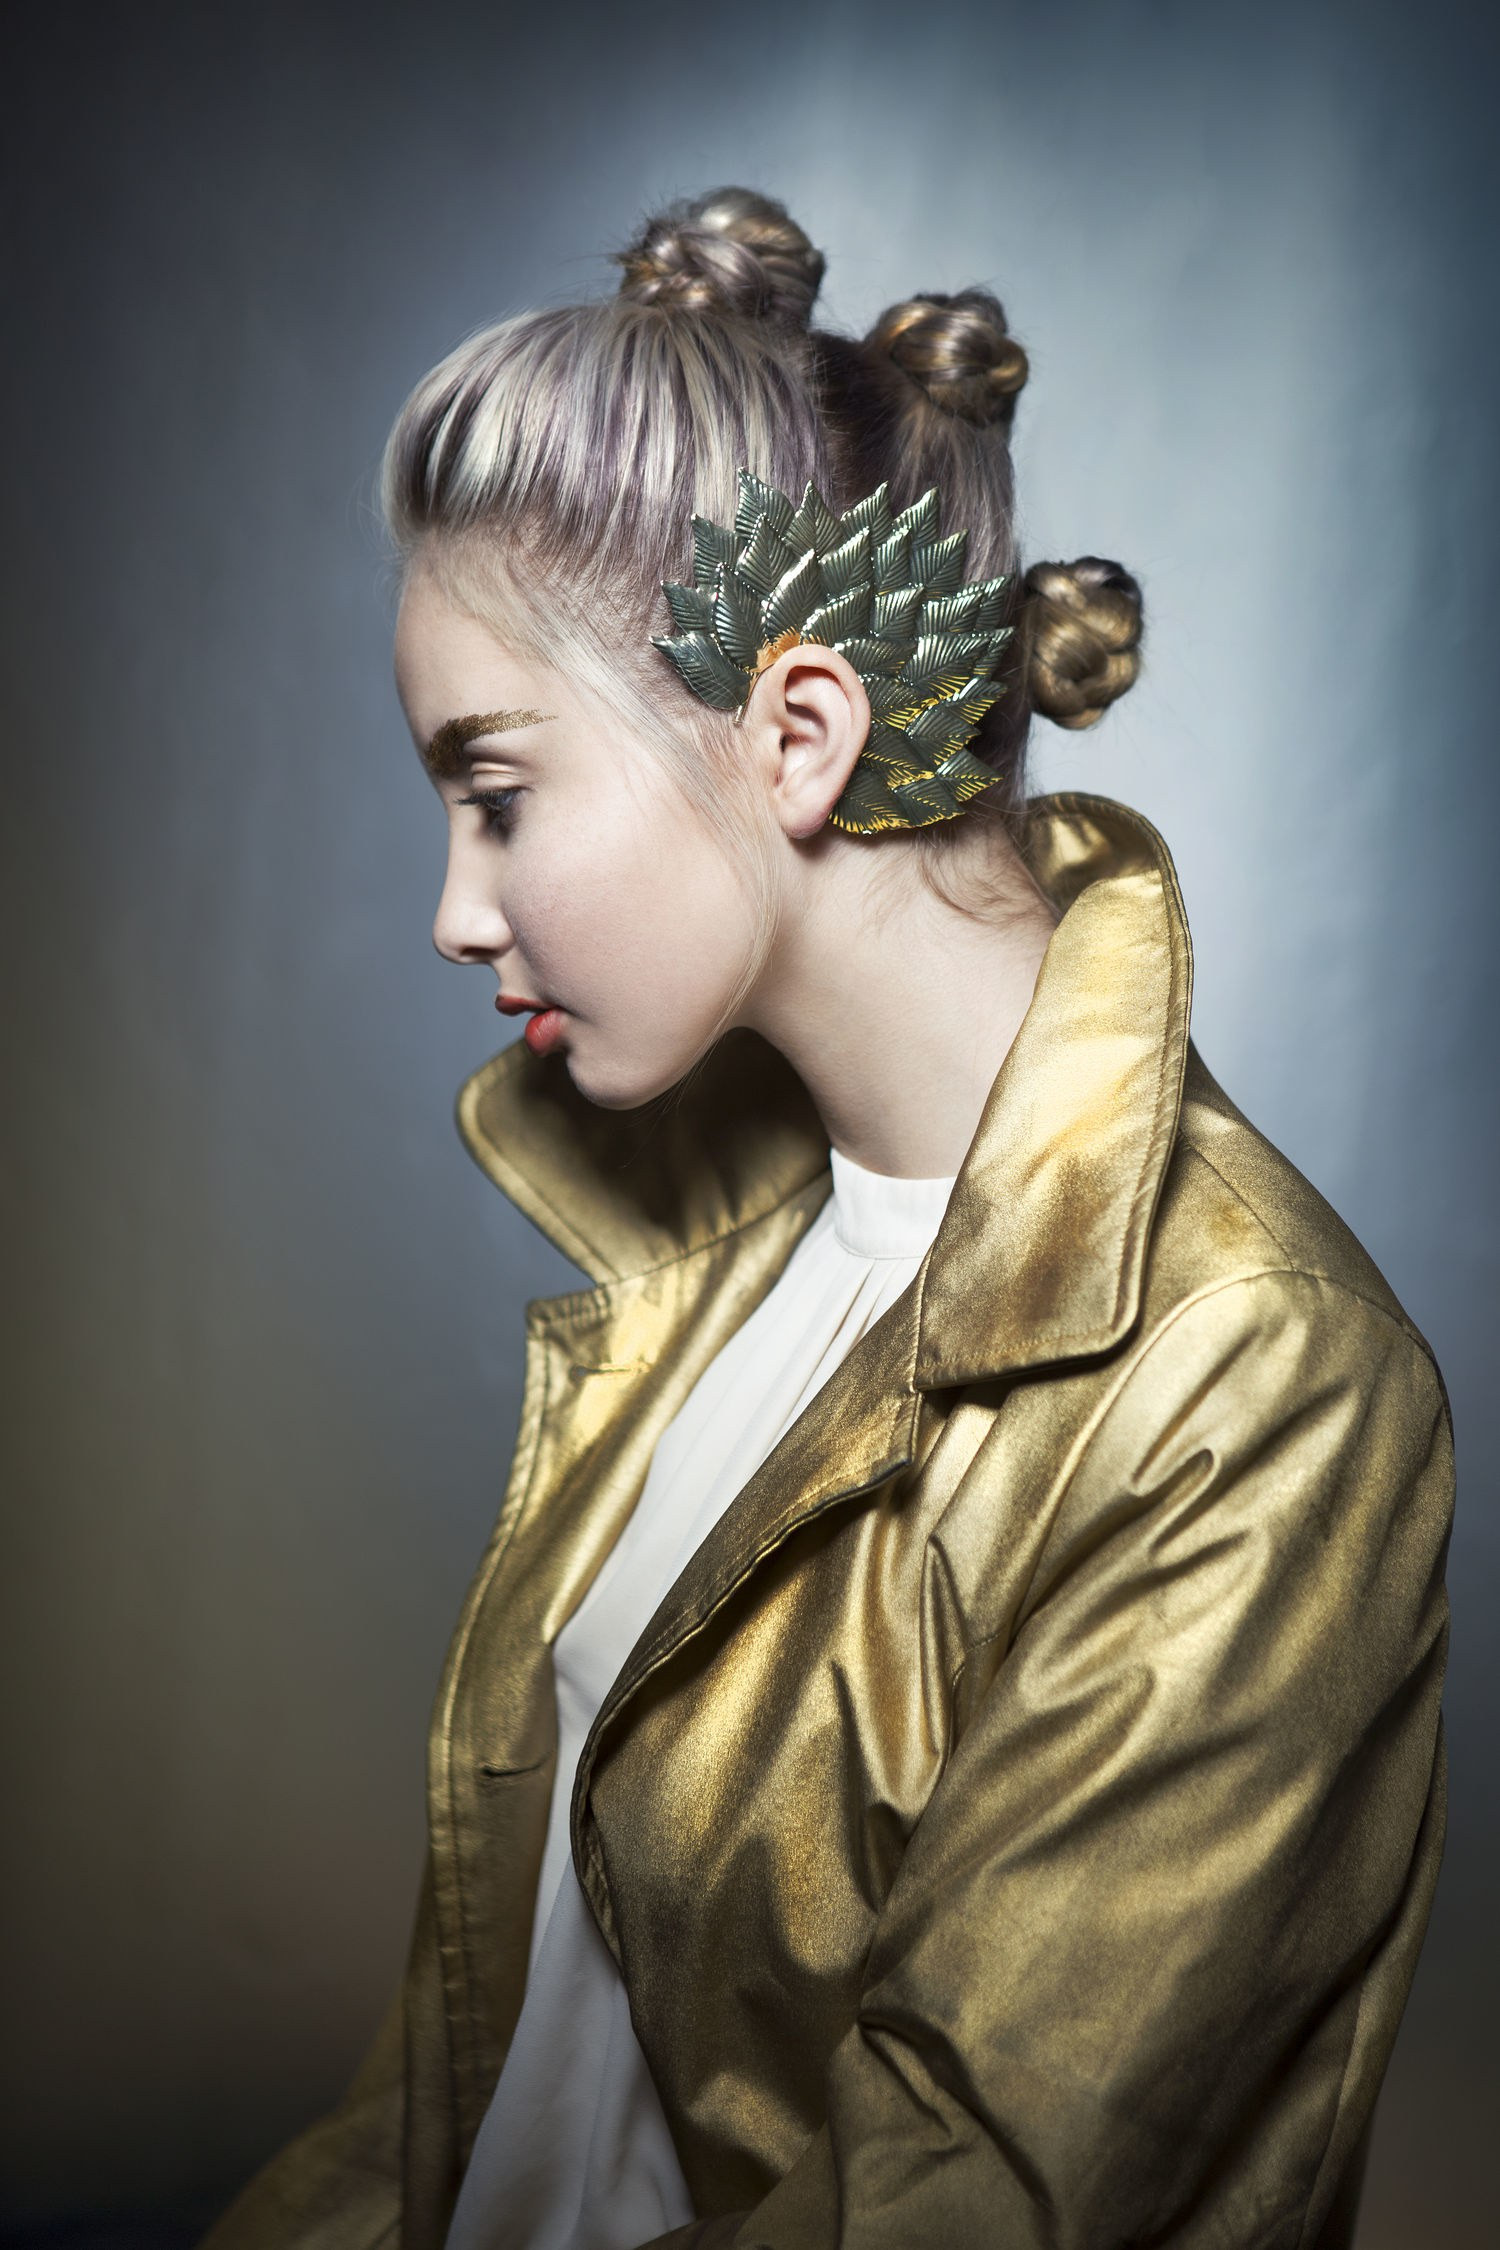 Star Wars Female Hairstyles
 The Force Is Strong With These Star Wars Inspired